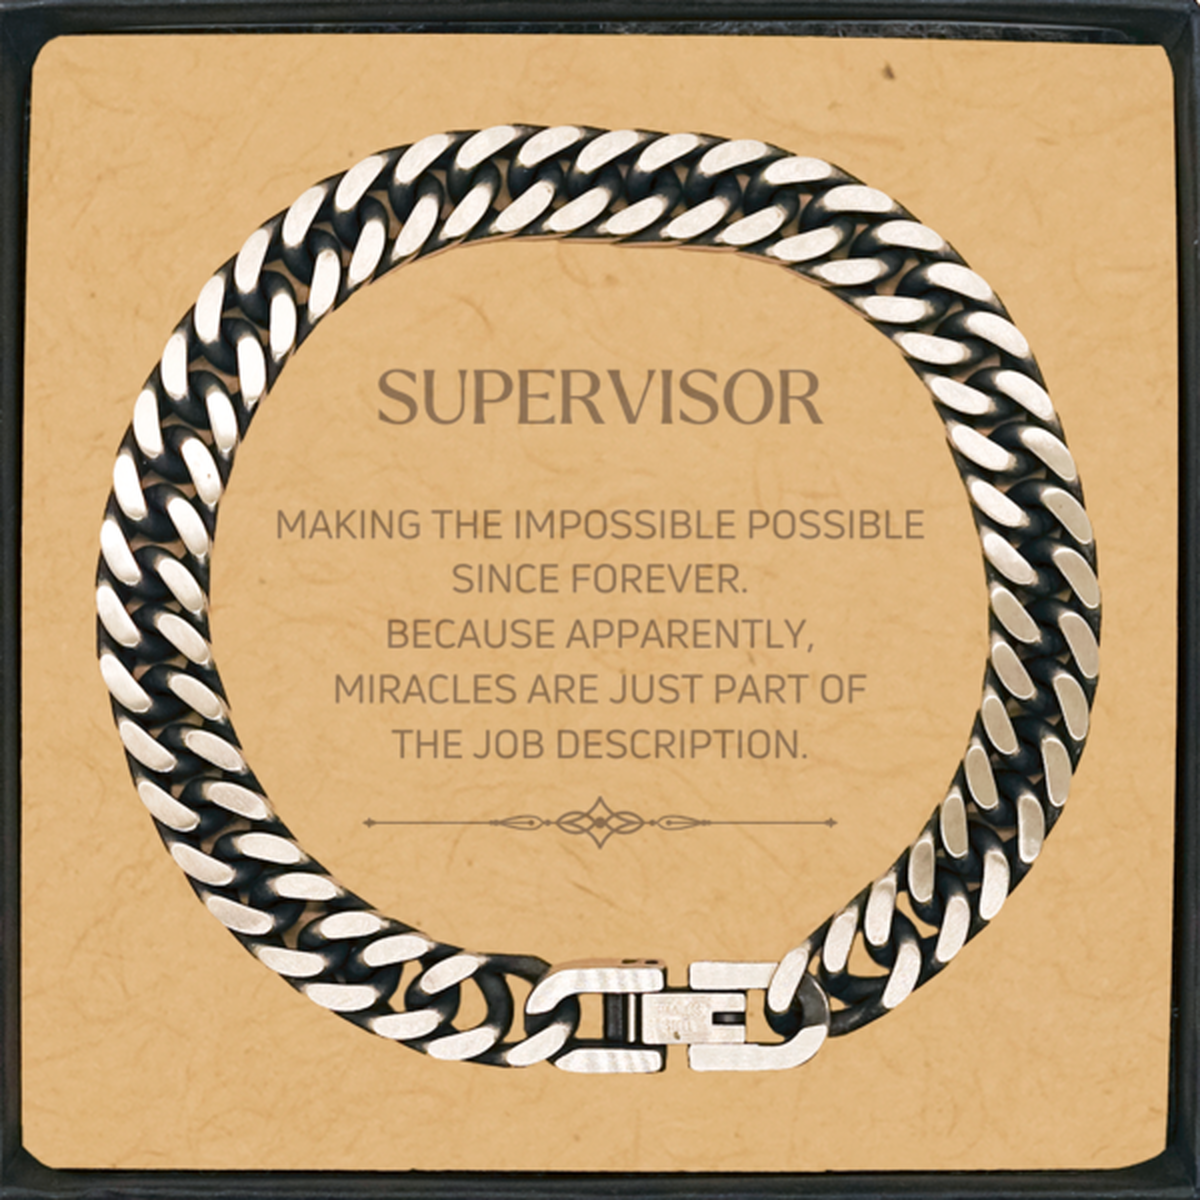 Funny Supervisor Gifts, Miracles are just part of the job description, Inspirational Birthday Cuban Link Chain Bracelet For Supervisor, Men, Women, Coworkers, Friends, Boss